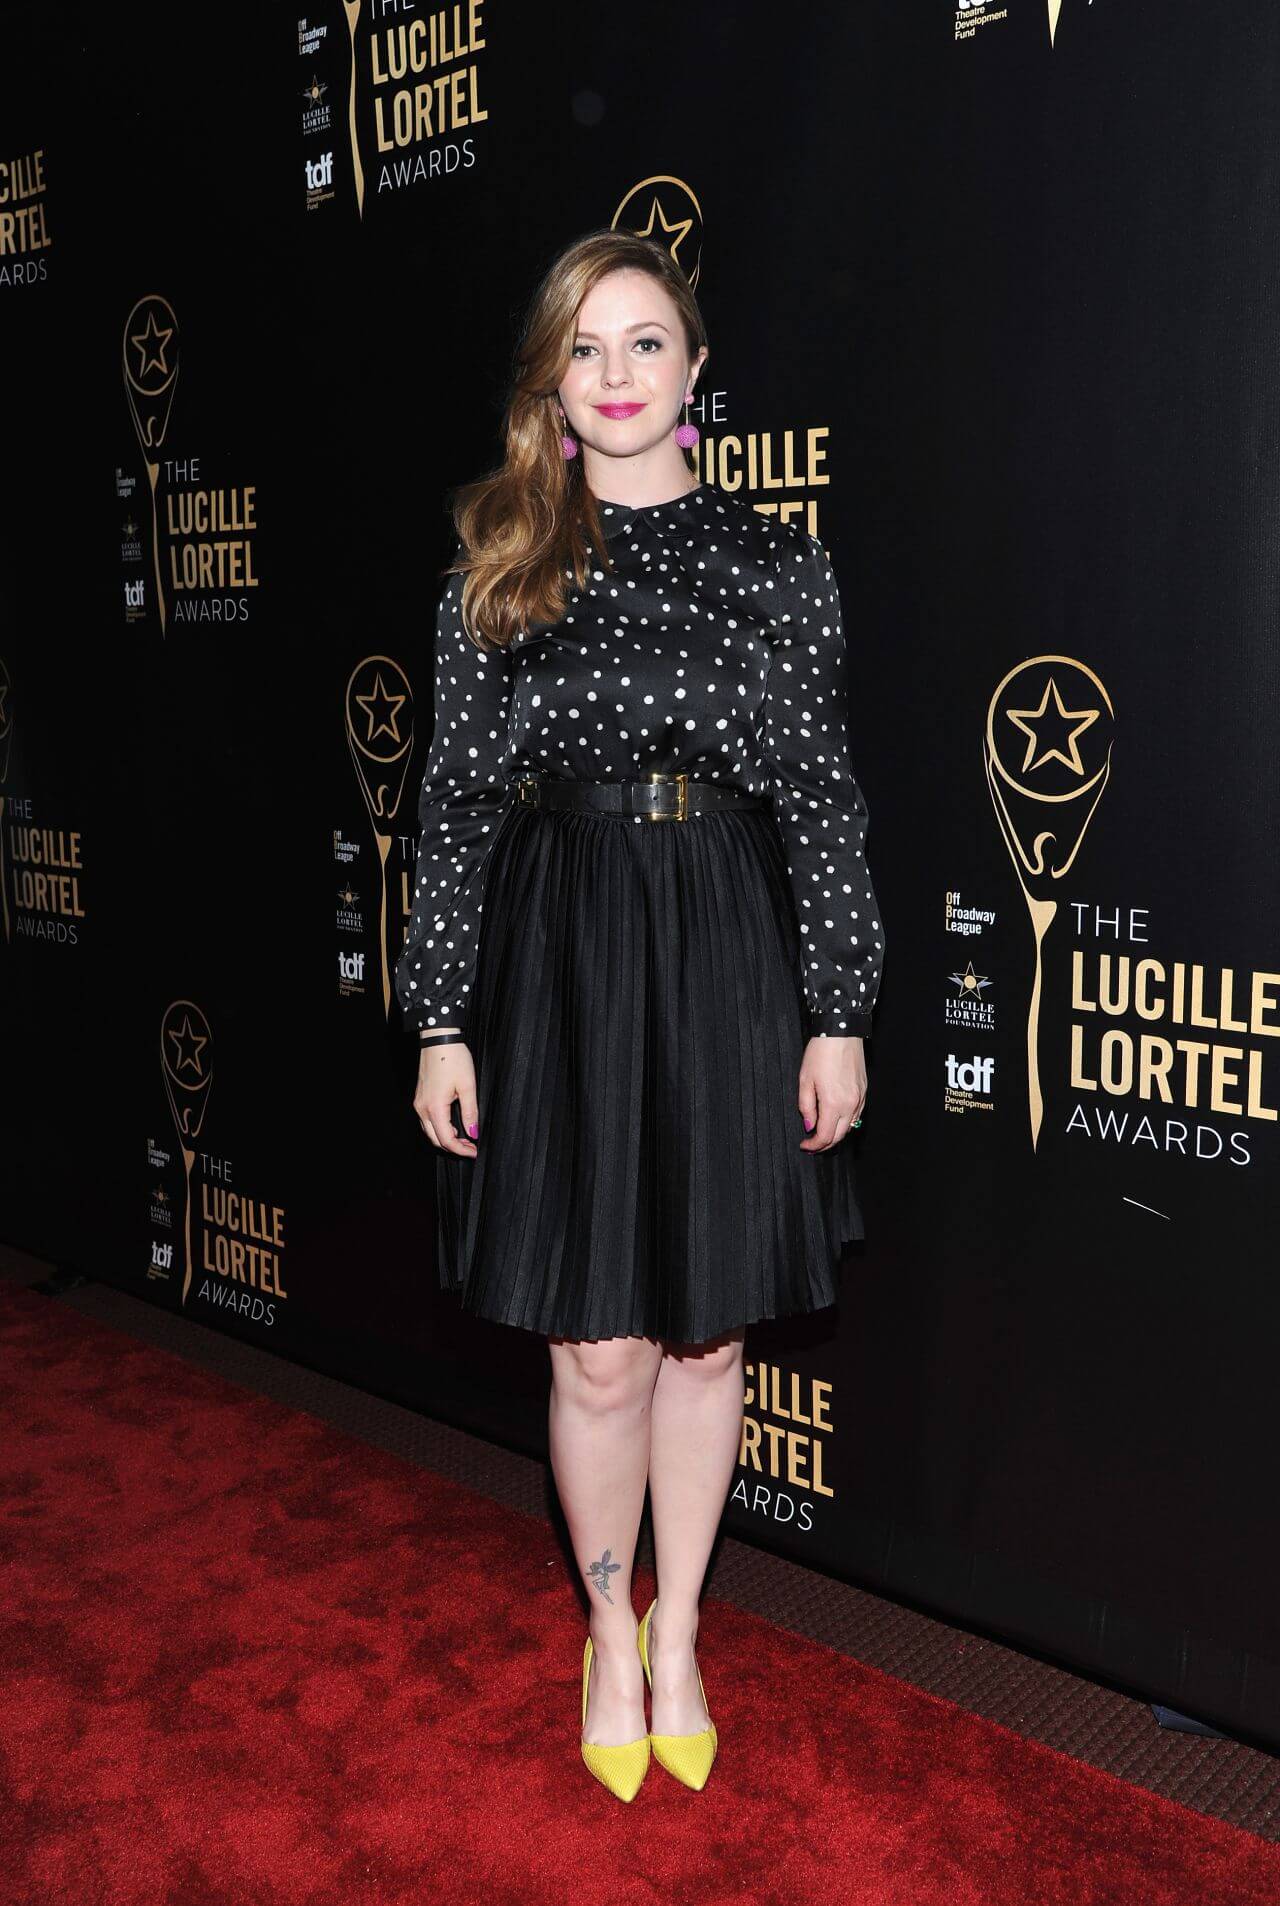 Amber Tamblyn  In Black Polka Dot Full Sleeves Top With Skirt Outfits At Lucille Lortel Awards in New York City